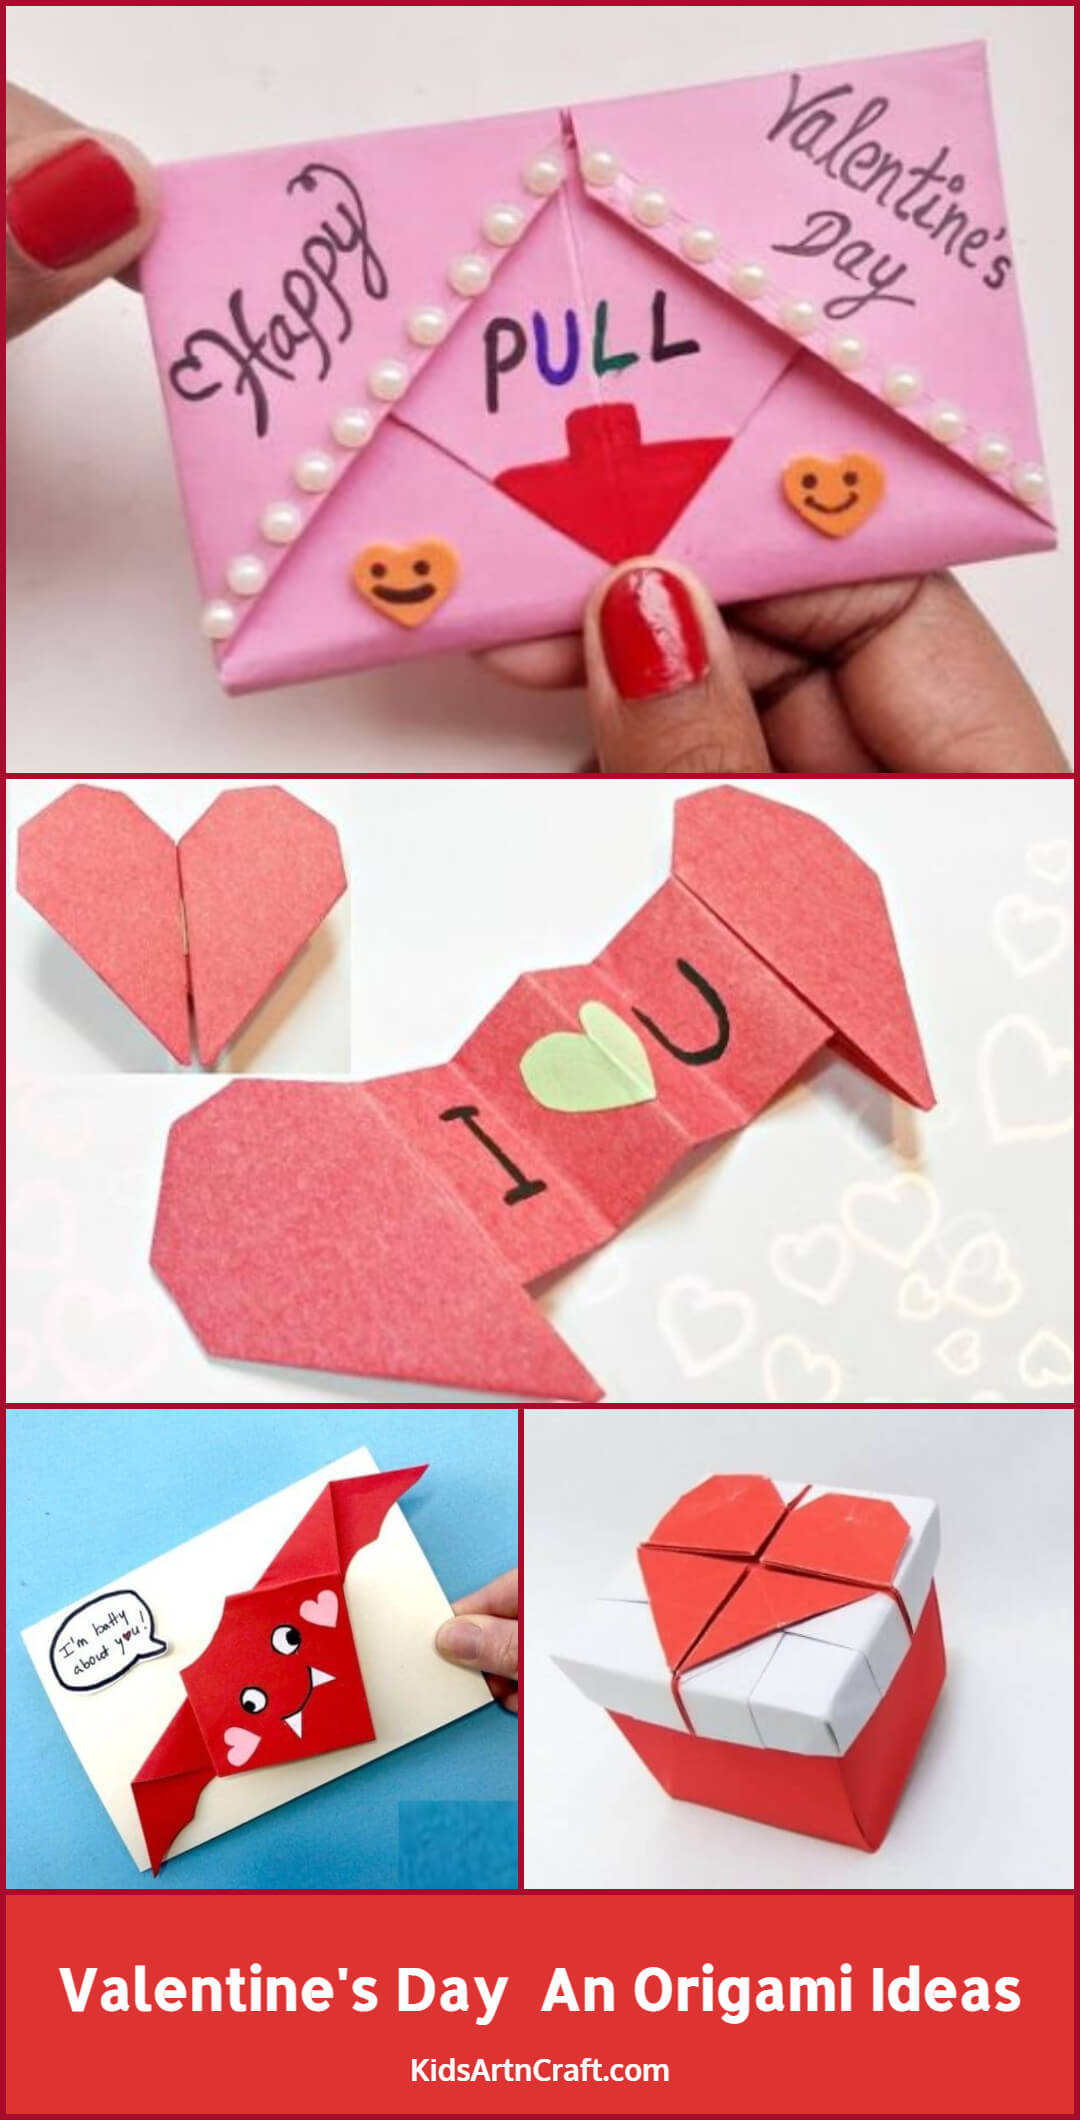 Valentine's Day Origami Ideas That Kids Can Make